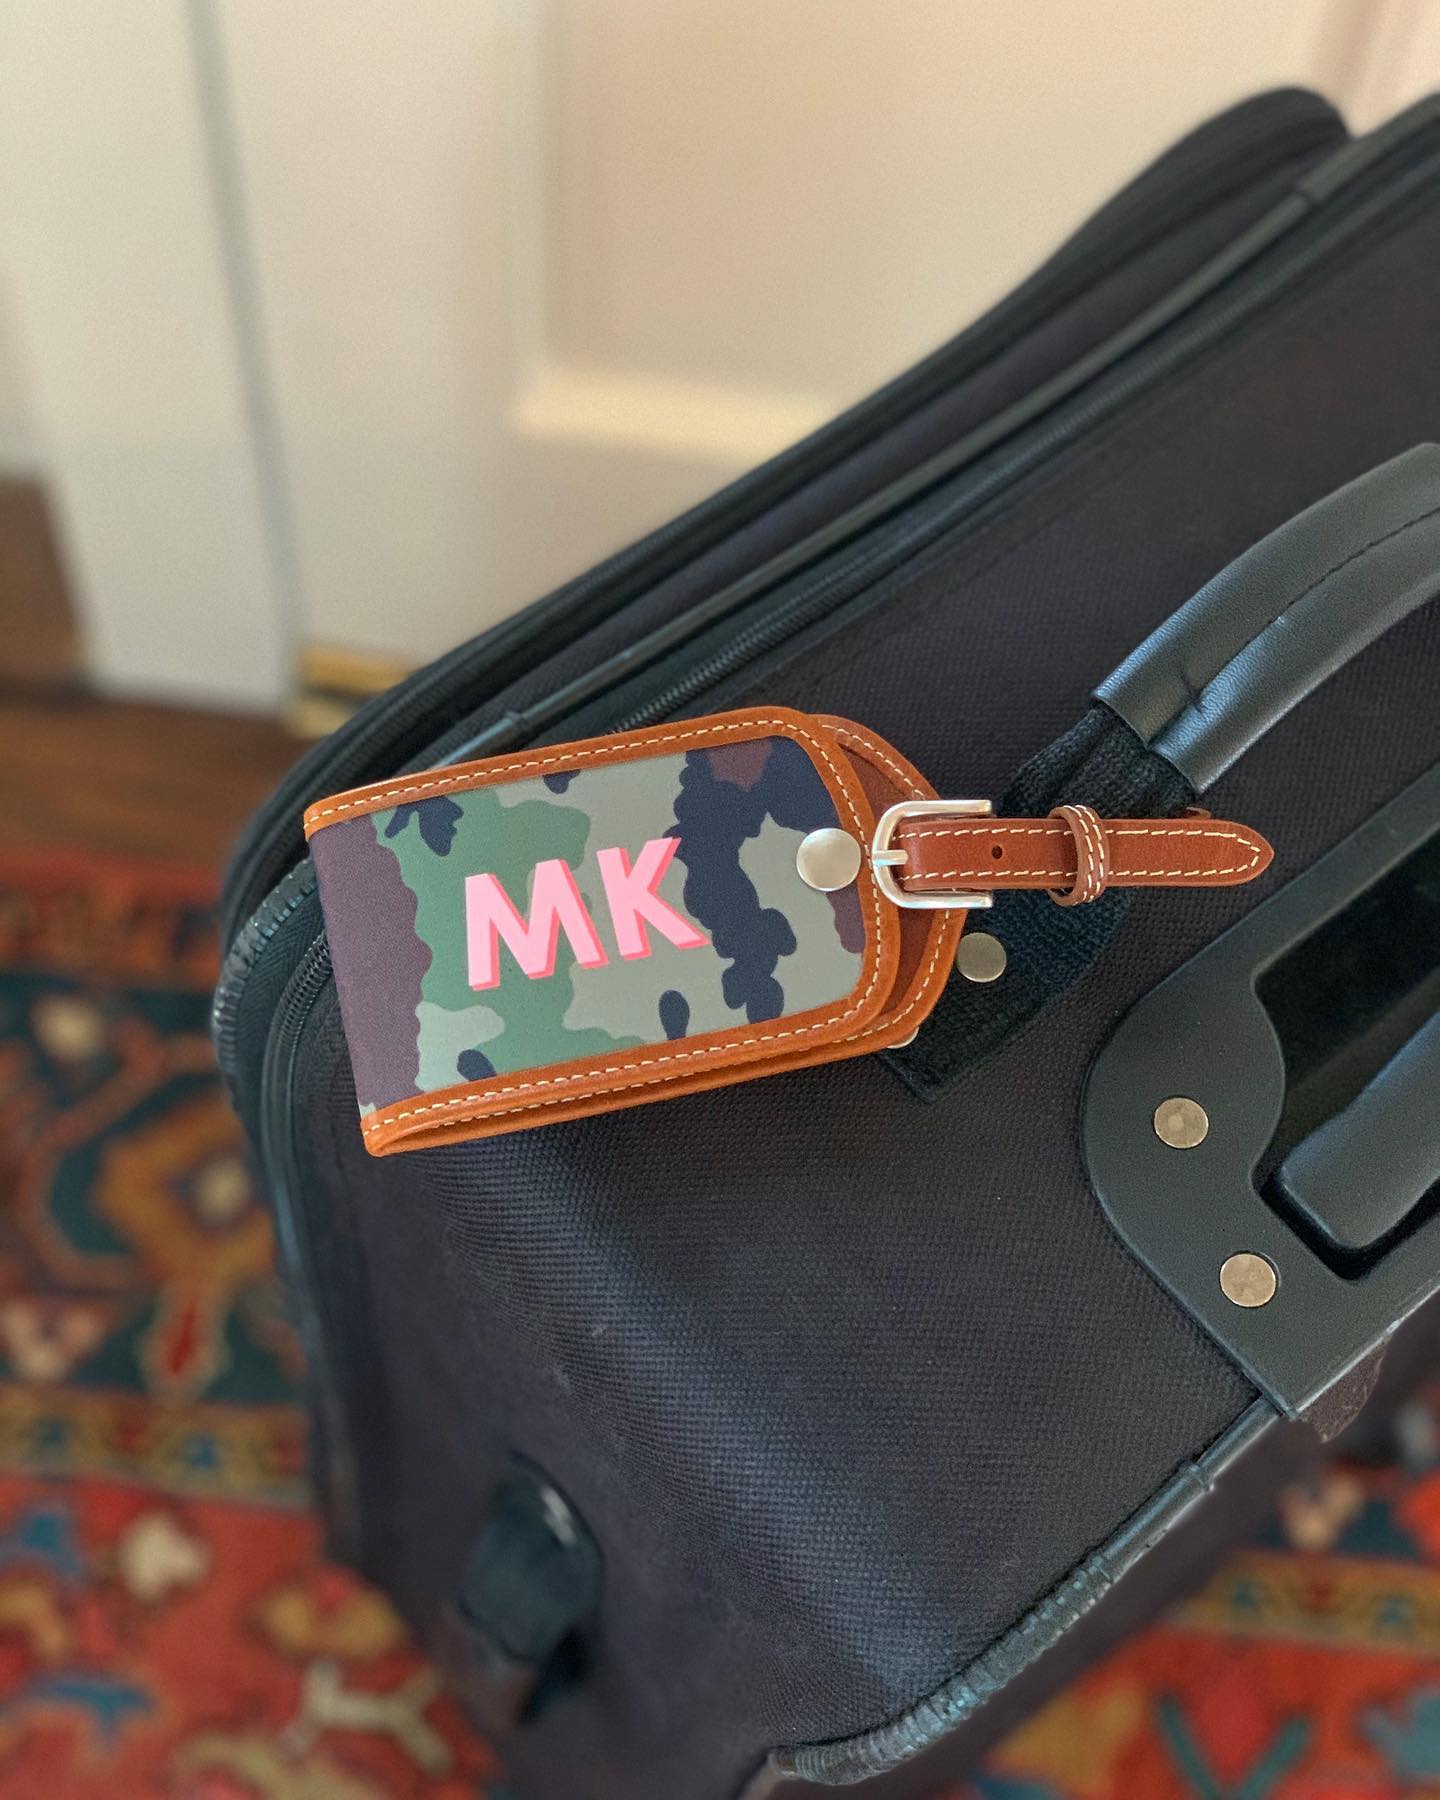 Custom leather luggage tags with colorful lights, holiday travel theme